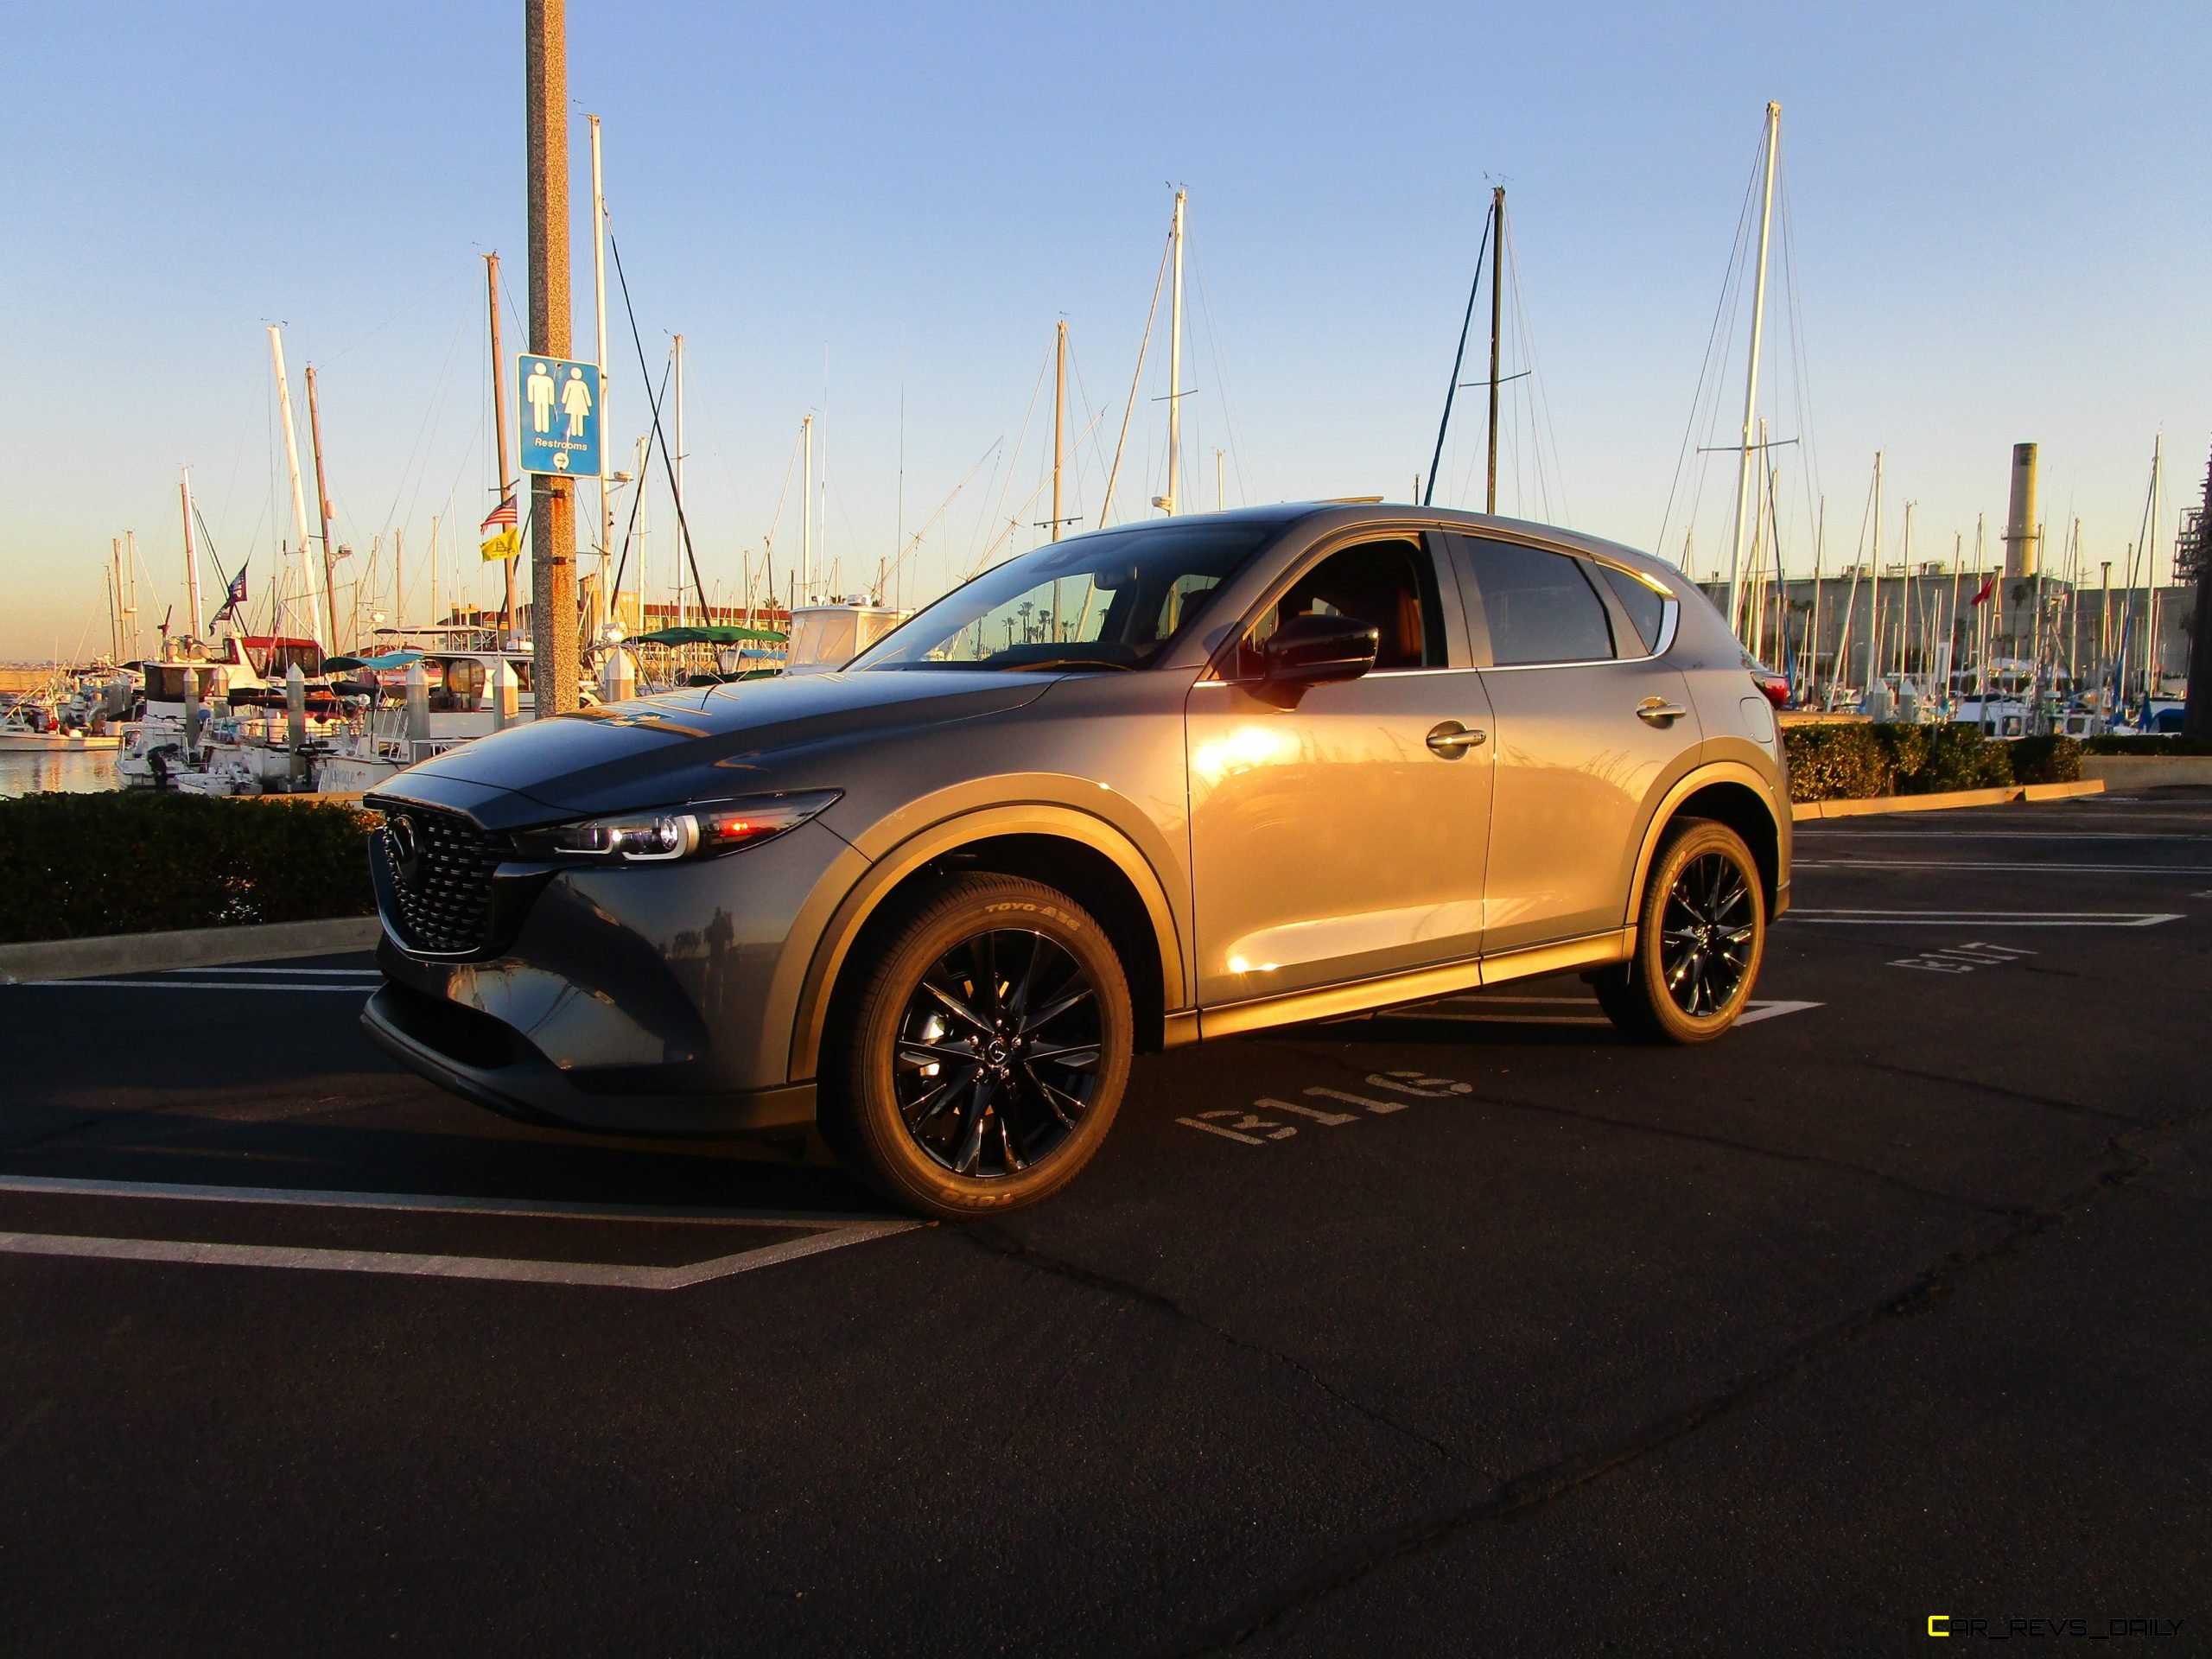 2020 Mazda CX-30 Road Trip Review: When Driving Doesn't Matter